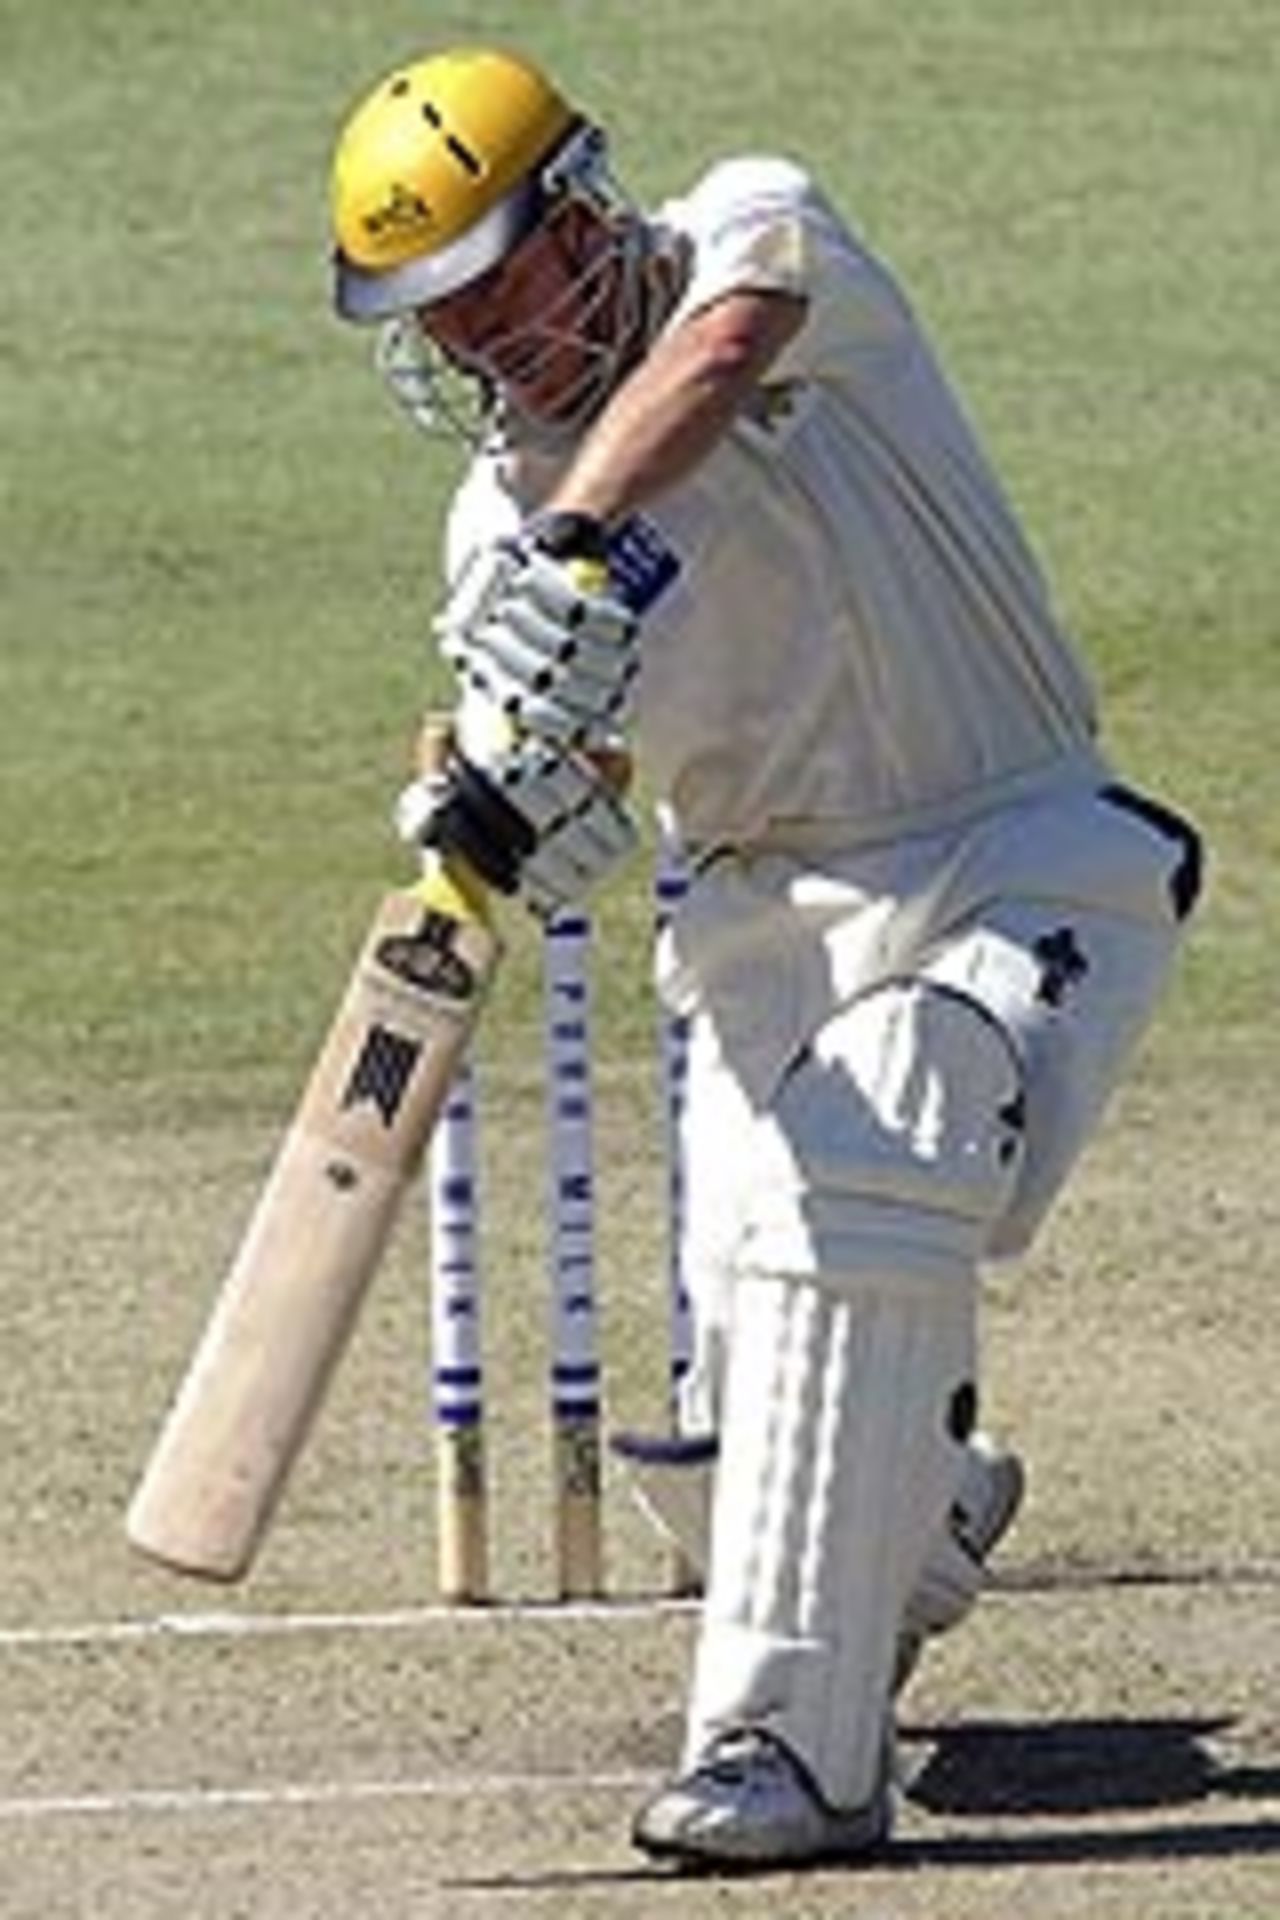 Chris Rogers drives during his 94 for Western Australia v Queensland, January 11, 2003